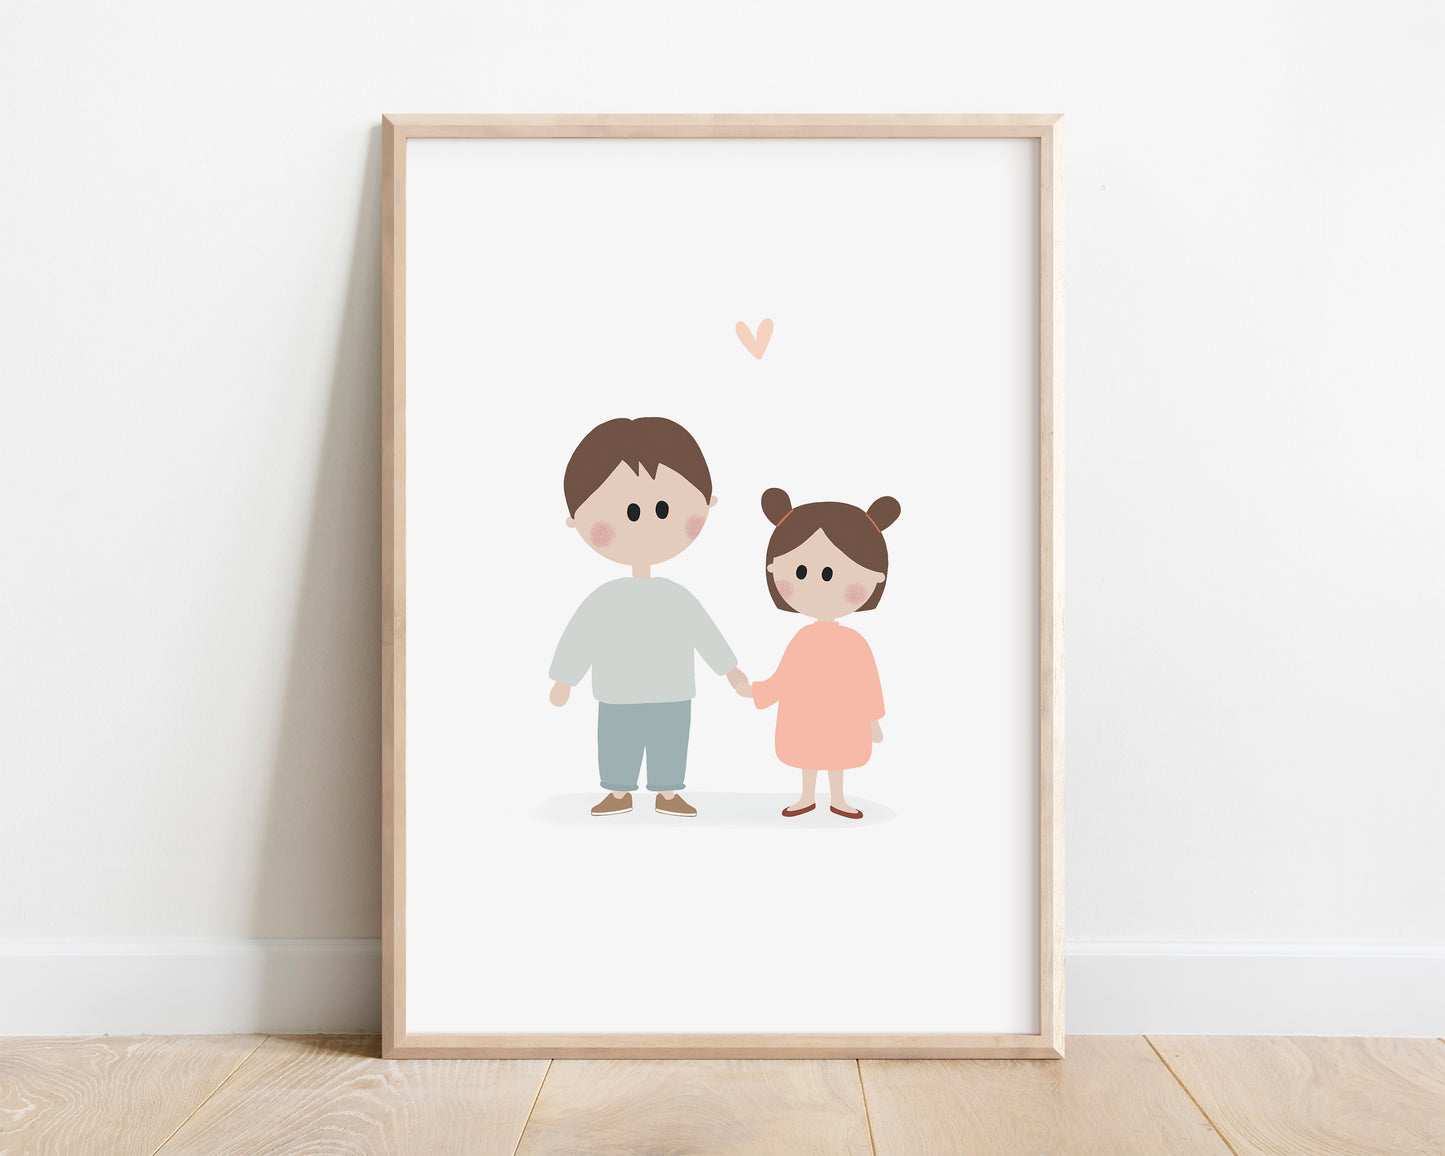 A beautifully illustrated art print featuring a little brother and his younger sister. This poster certainly brings joy and tenderness to your walls with soft pastel colors.